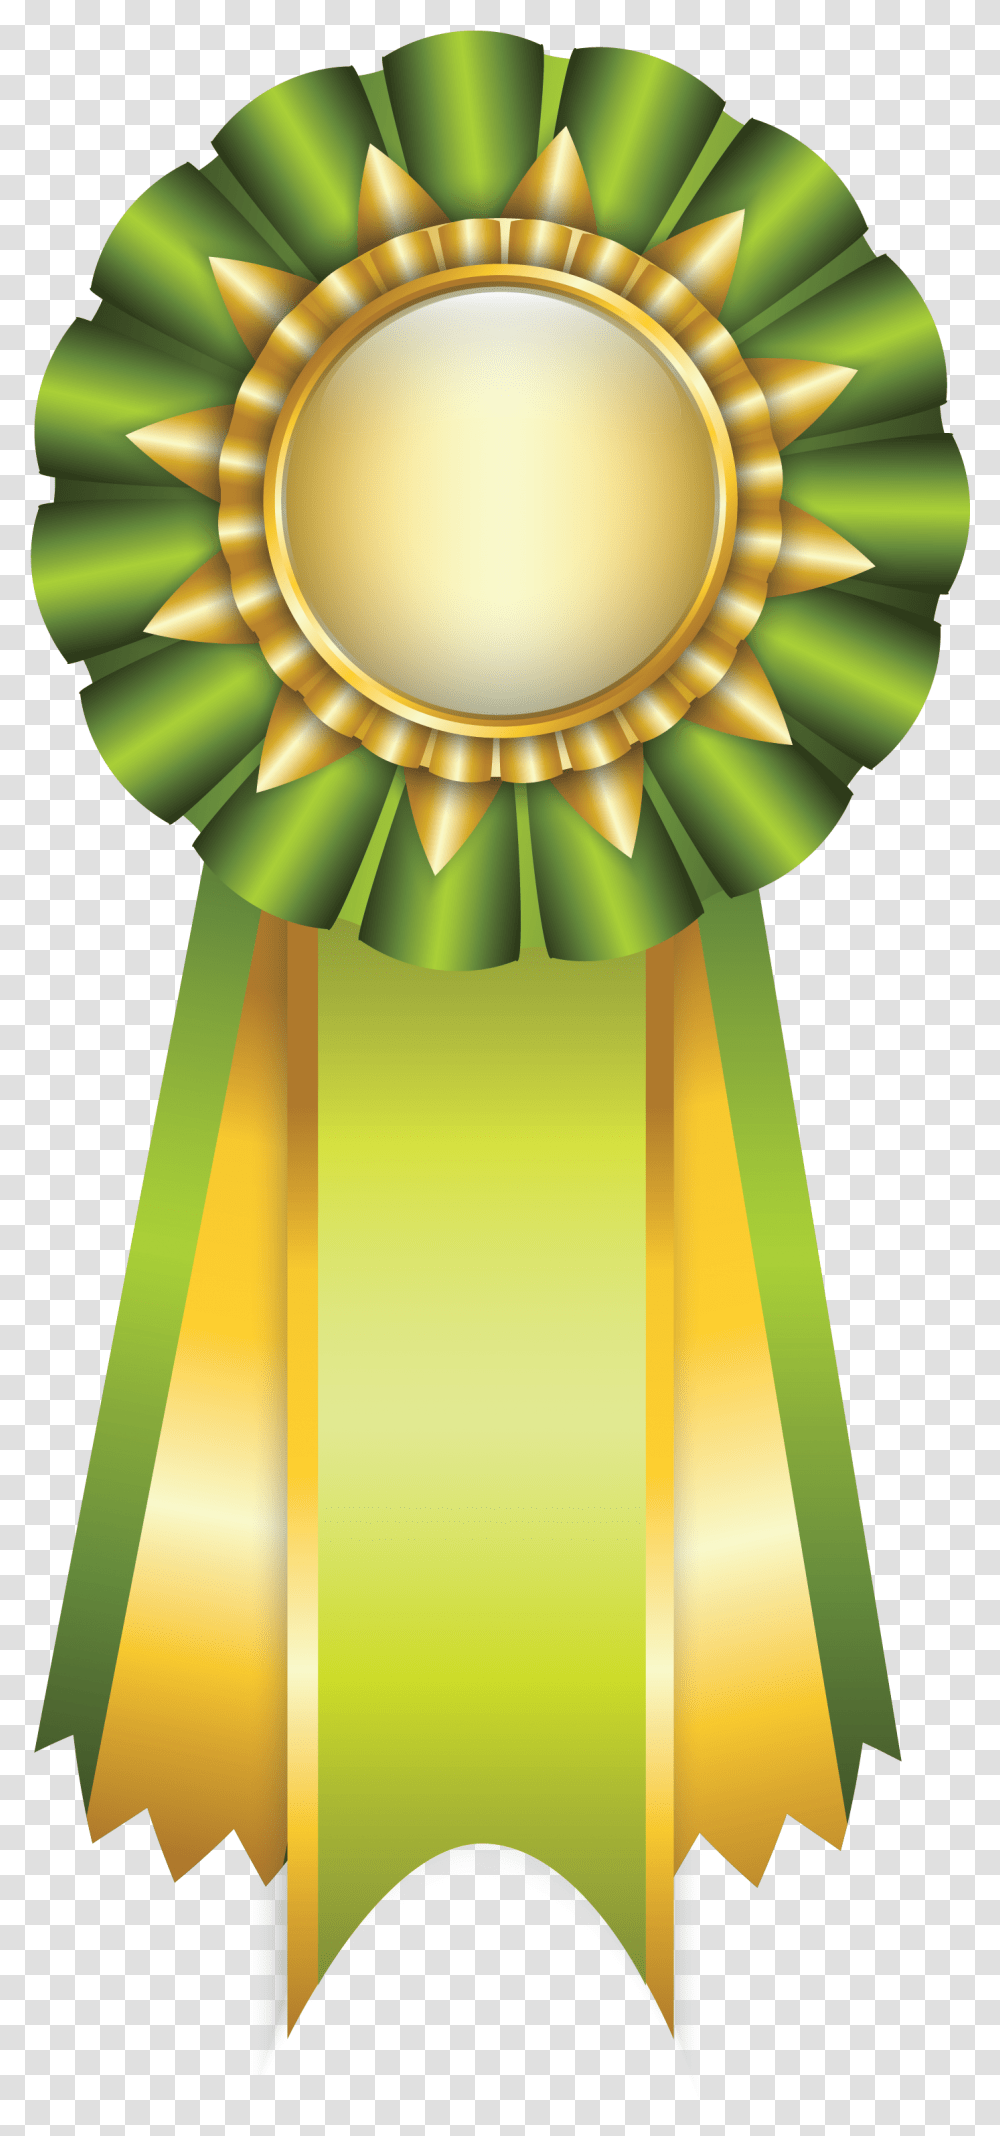 Green Rosette Ribbon Clipart Picture Gallery Ribbon Design For Graduation, Gold, Lamp, Trophy, Logo Transparent Png